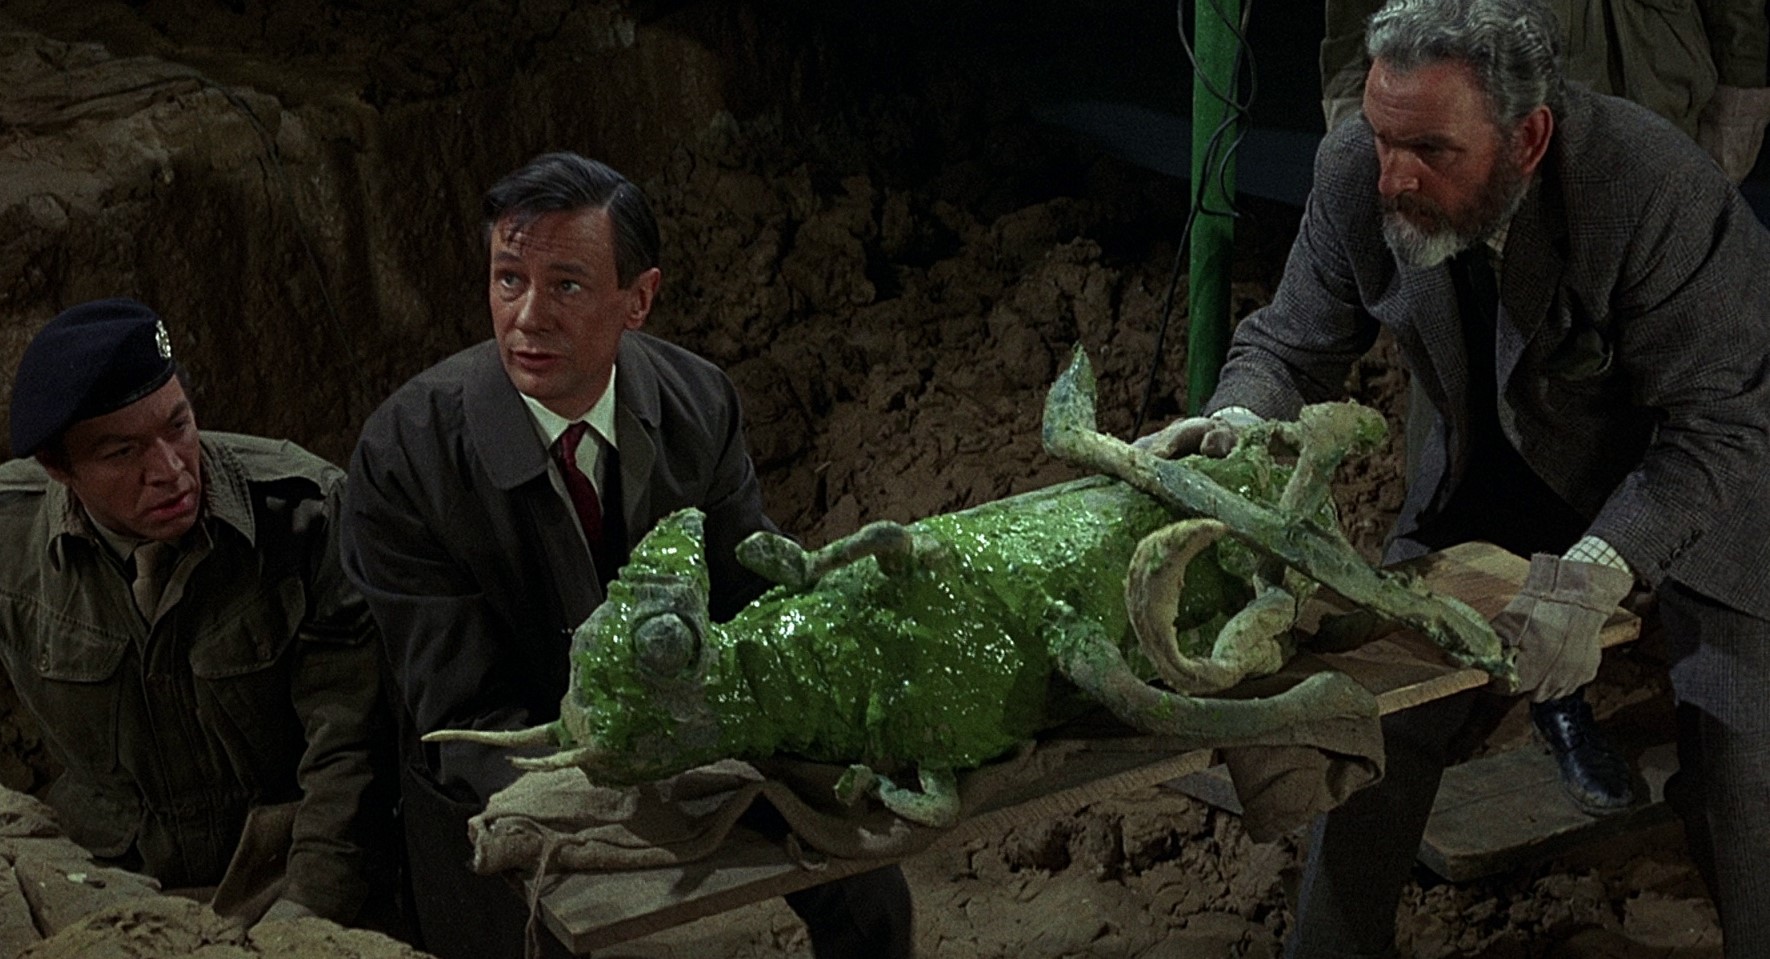 Quatermass and the Pit Movie Review